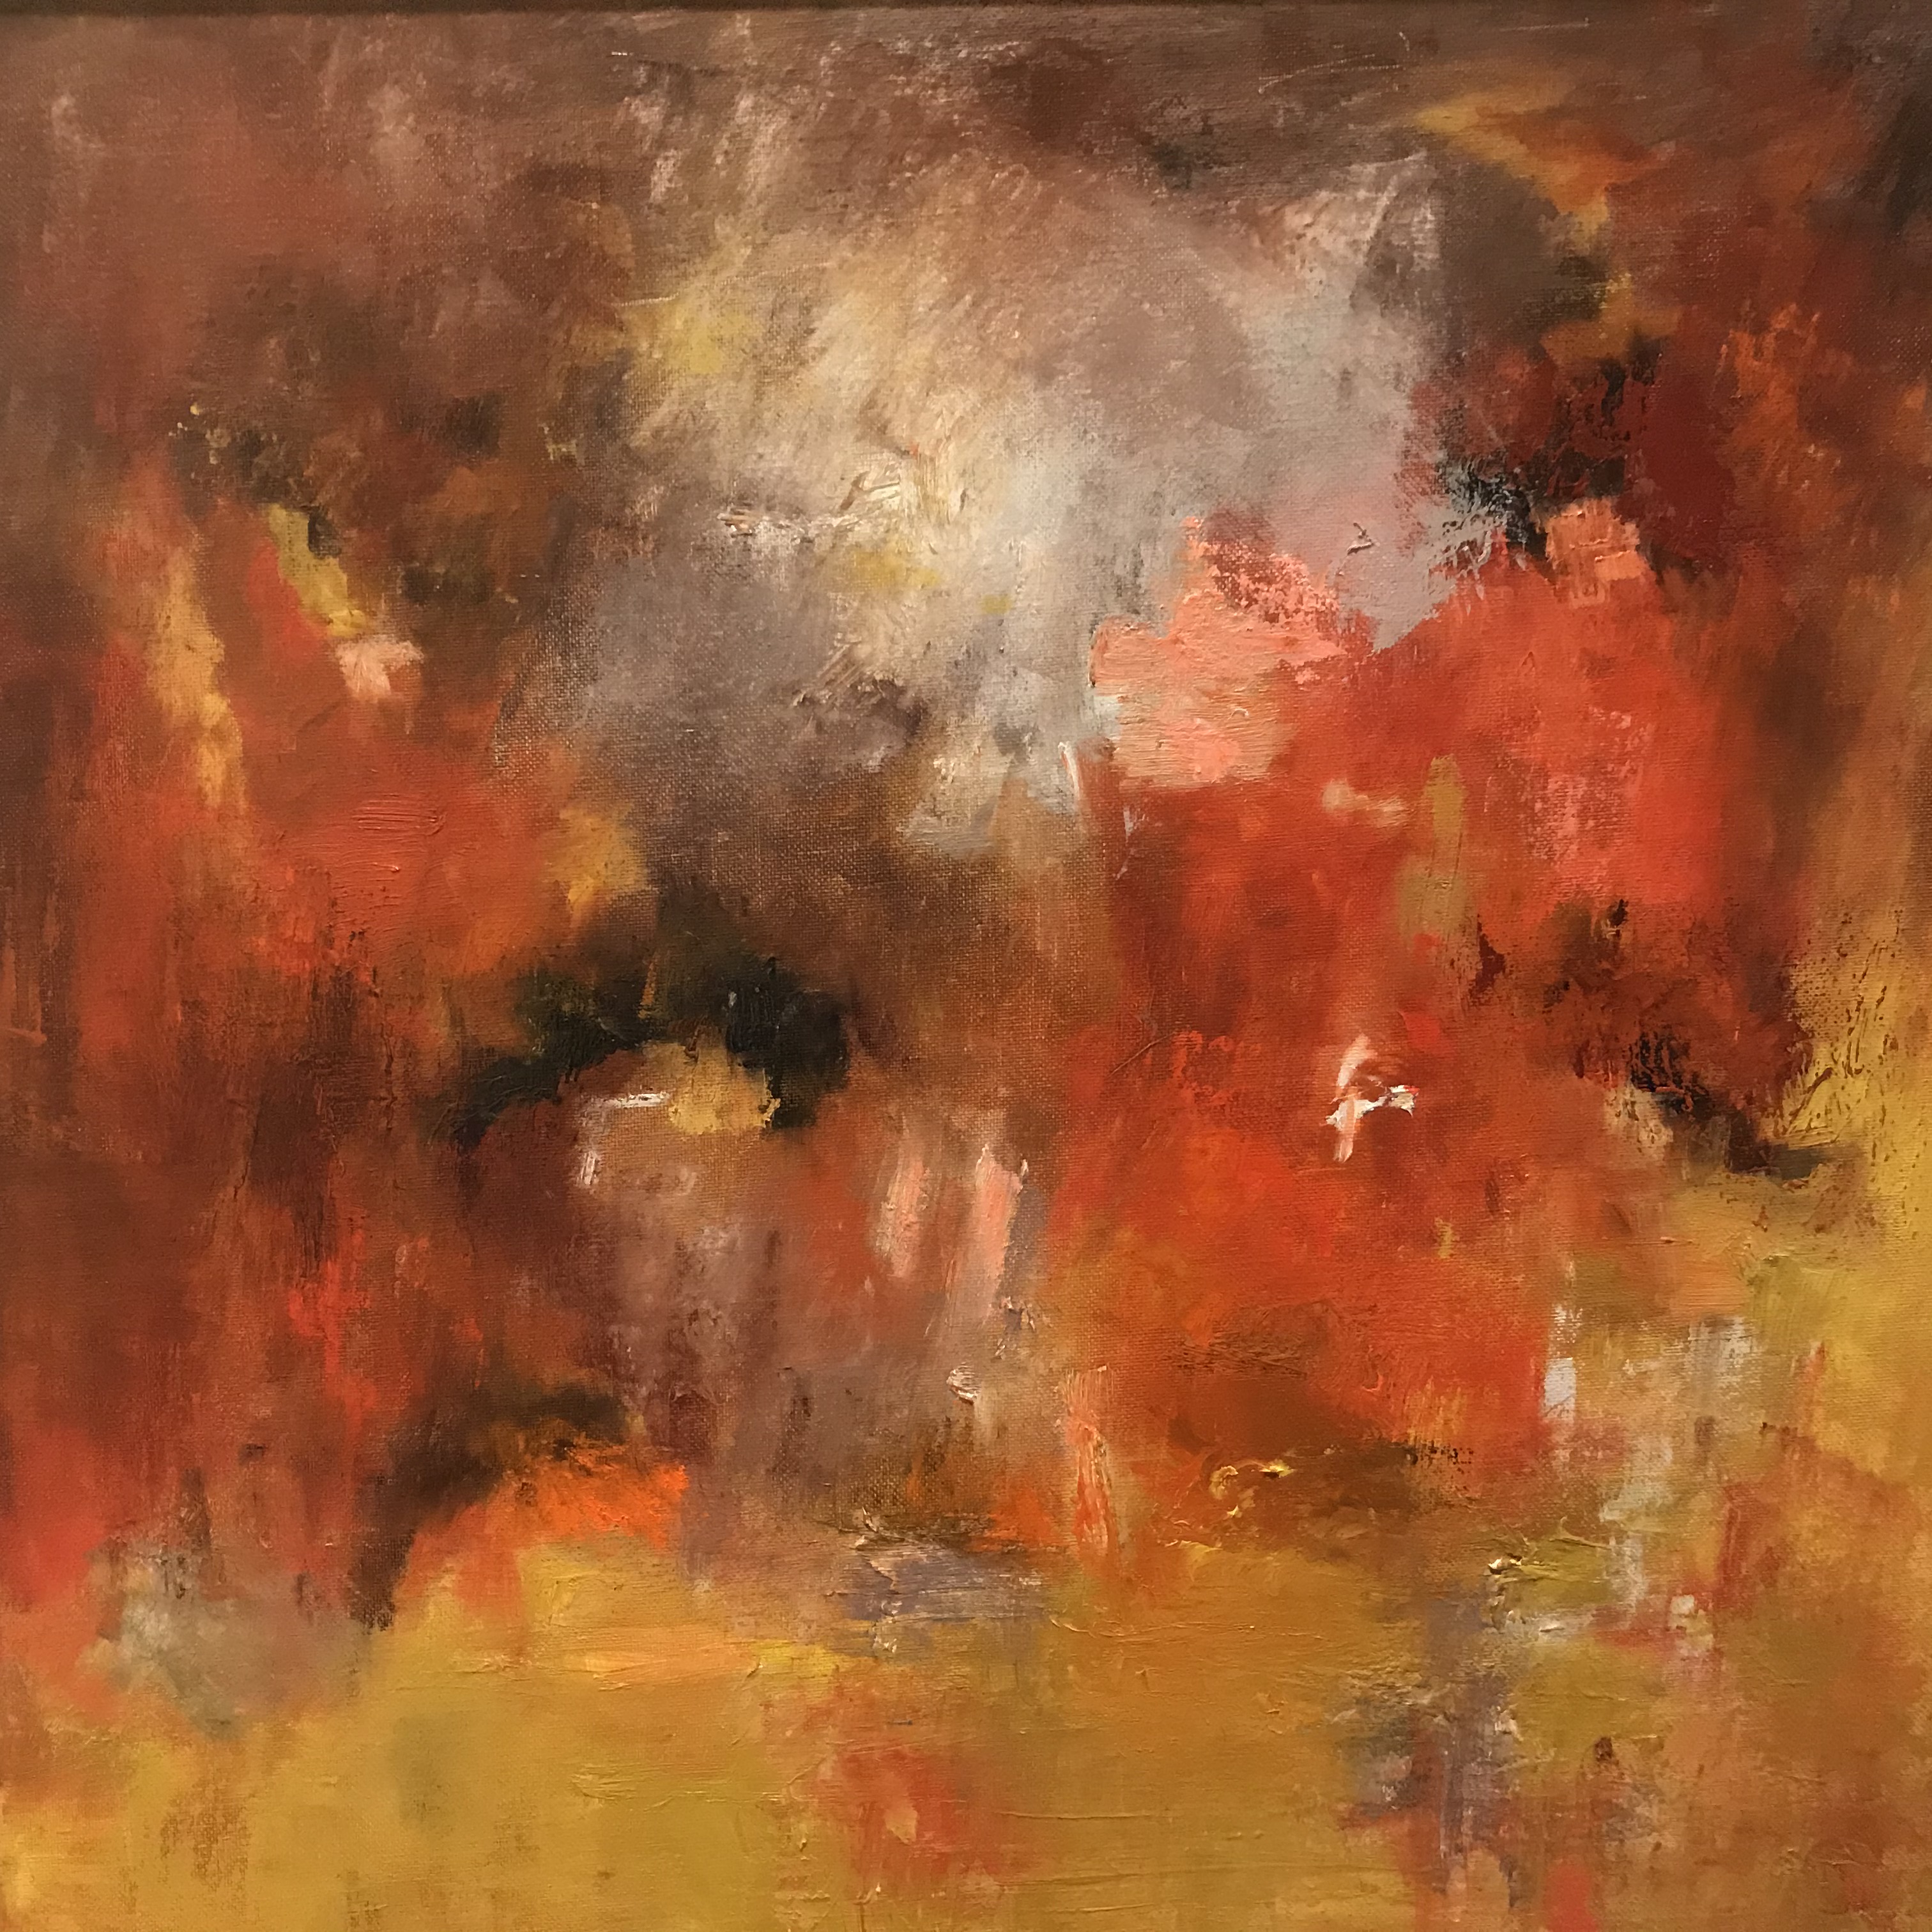 Abstract painting with cloud-like imagery in shades of red, orange, and yellow